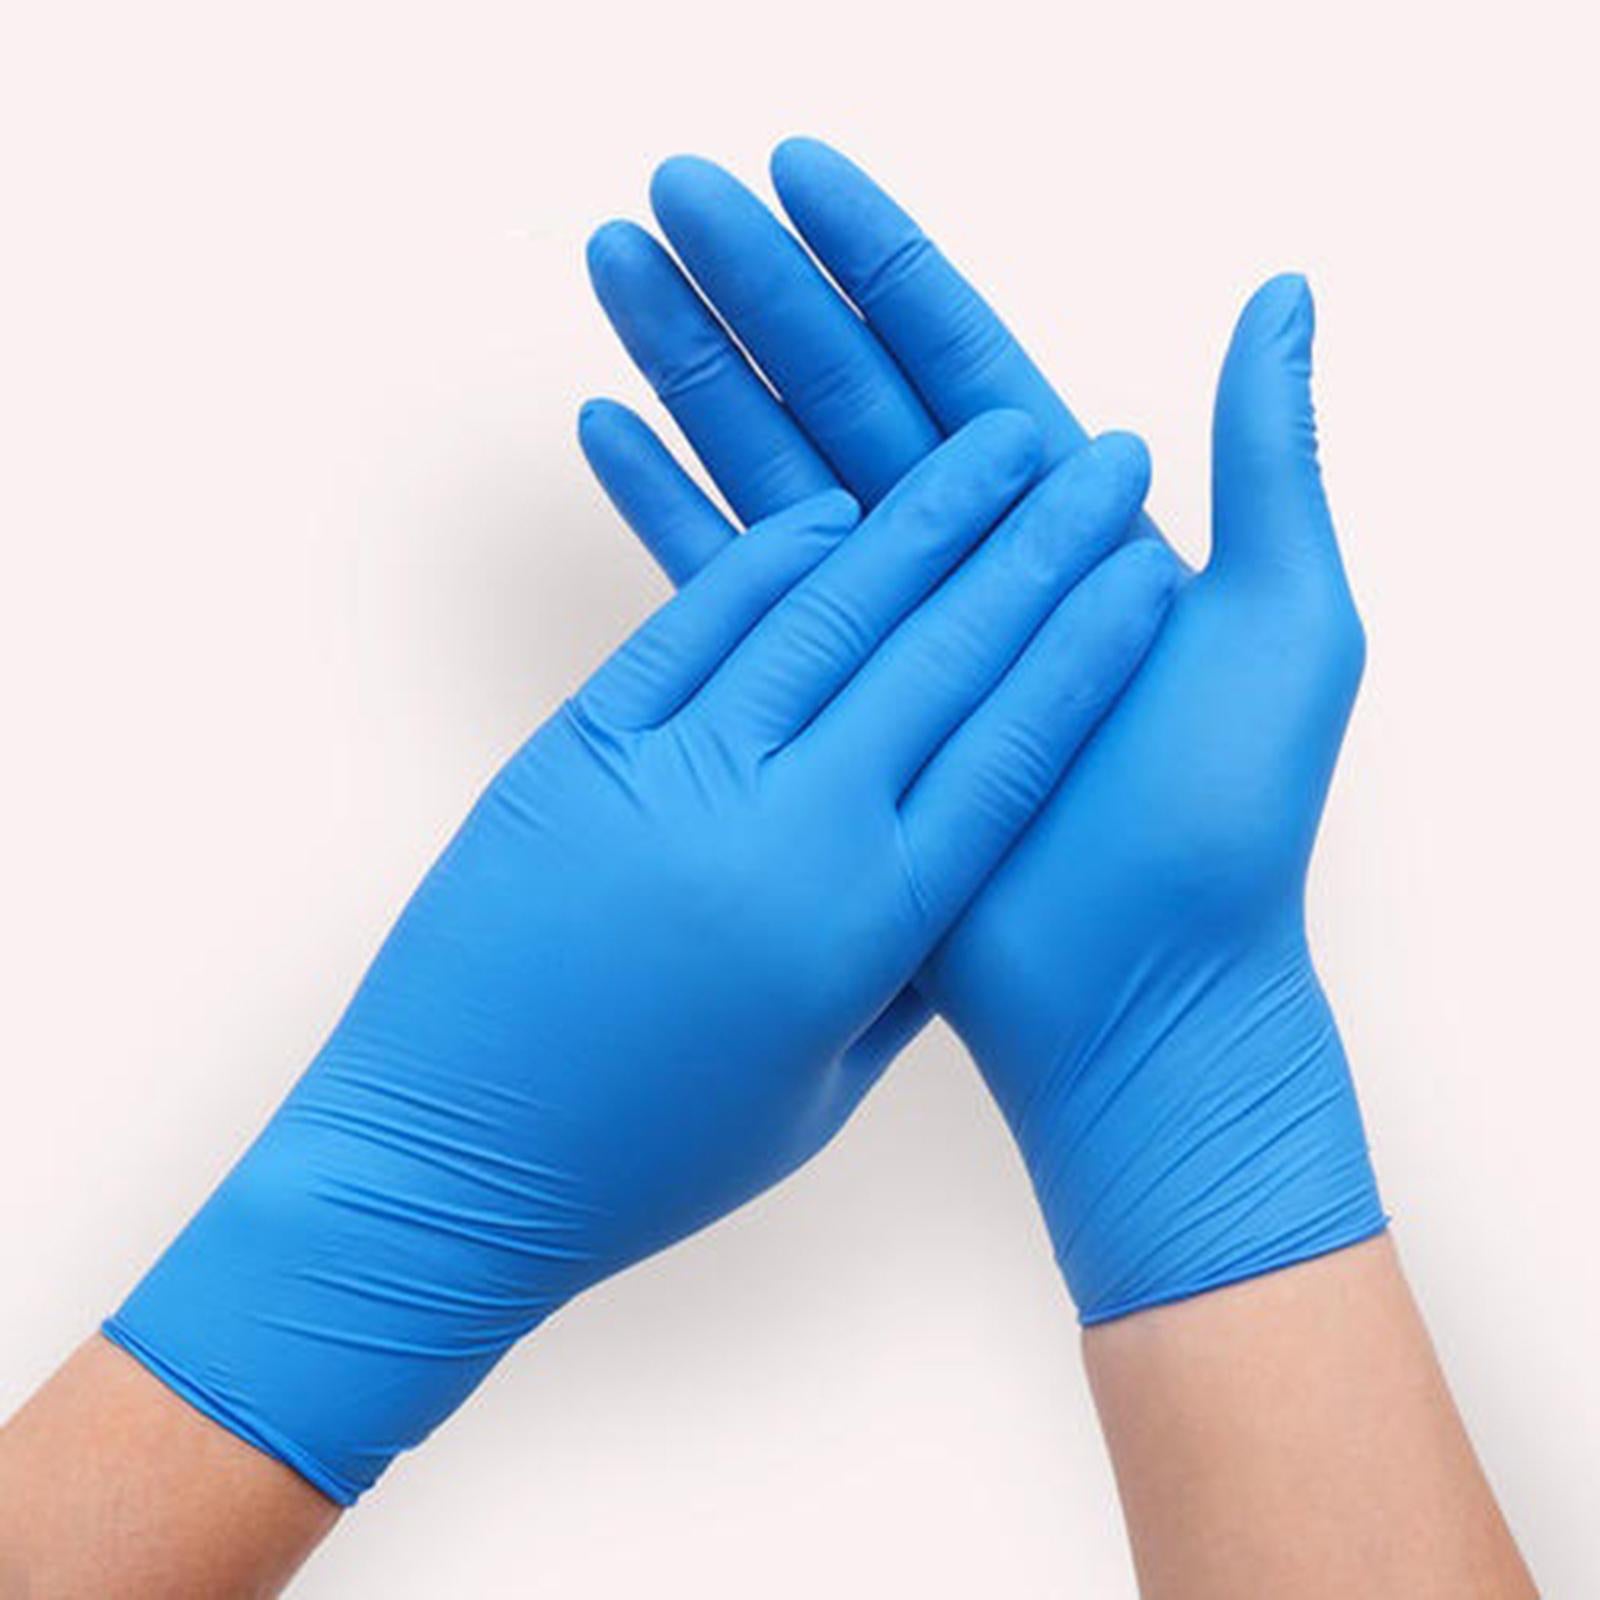 10Pcs Strong Nitrile Gloves Powder Free Pet Care Protective Gloves Blue XL